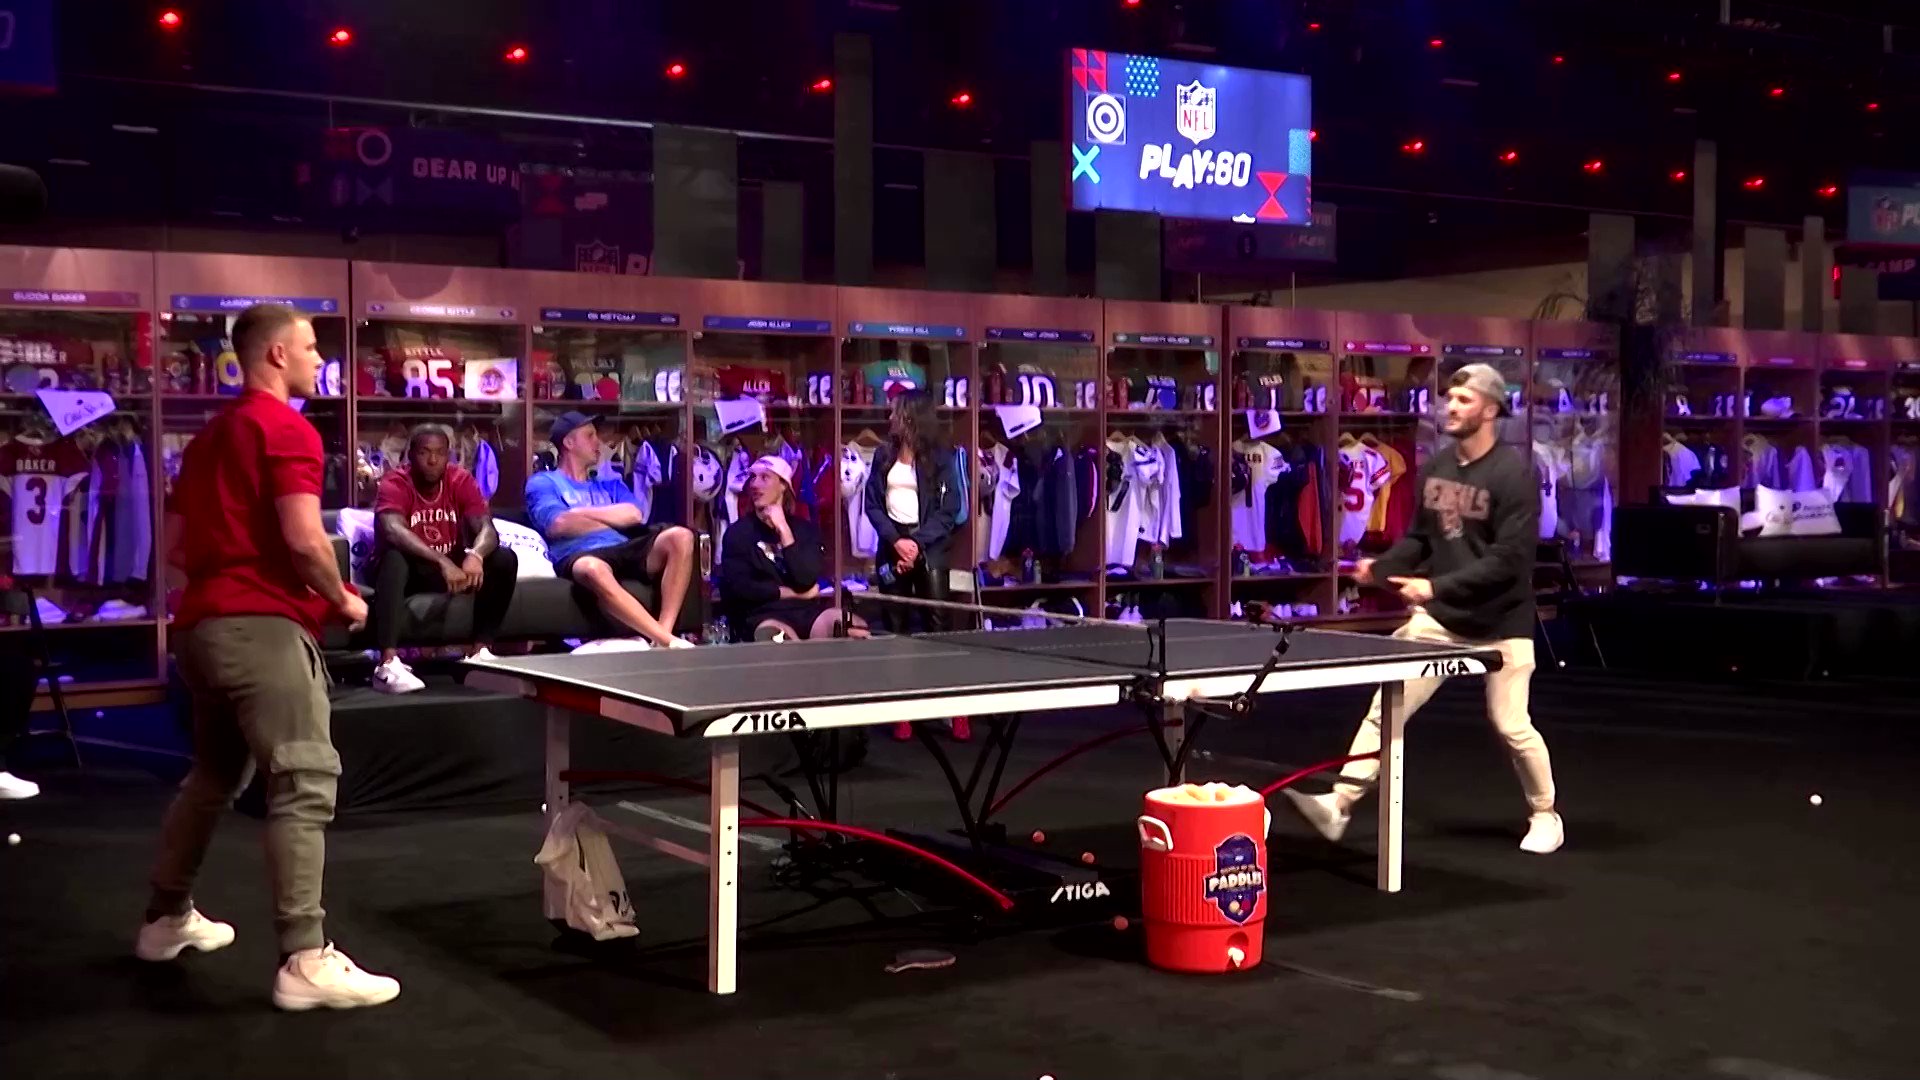 Reuters on Twitter "NFL stars showed off their ping pong skills at the